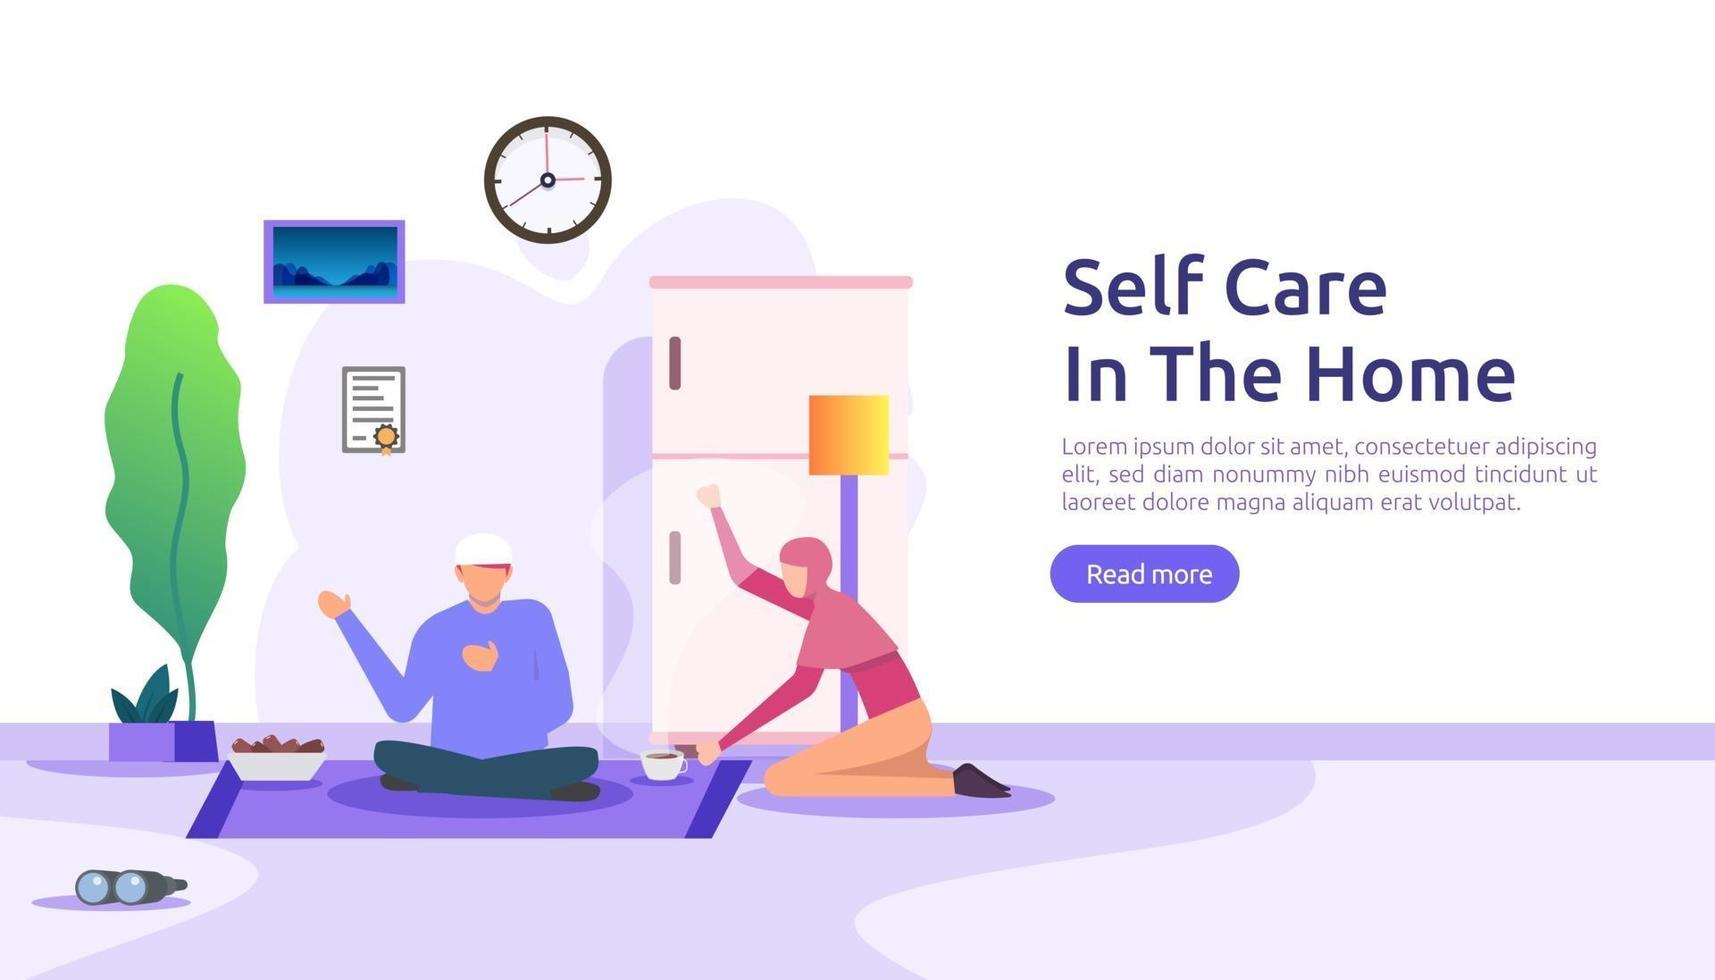 self care and stay home concept. Self isolation, home activities, quarantine due to coronavirus illustration template for landing page, banner, presentation, social, poster, promotion or print media vector